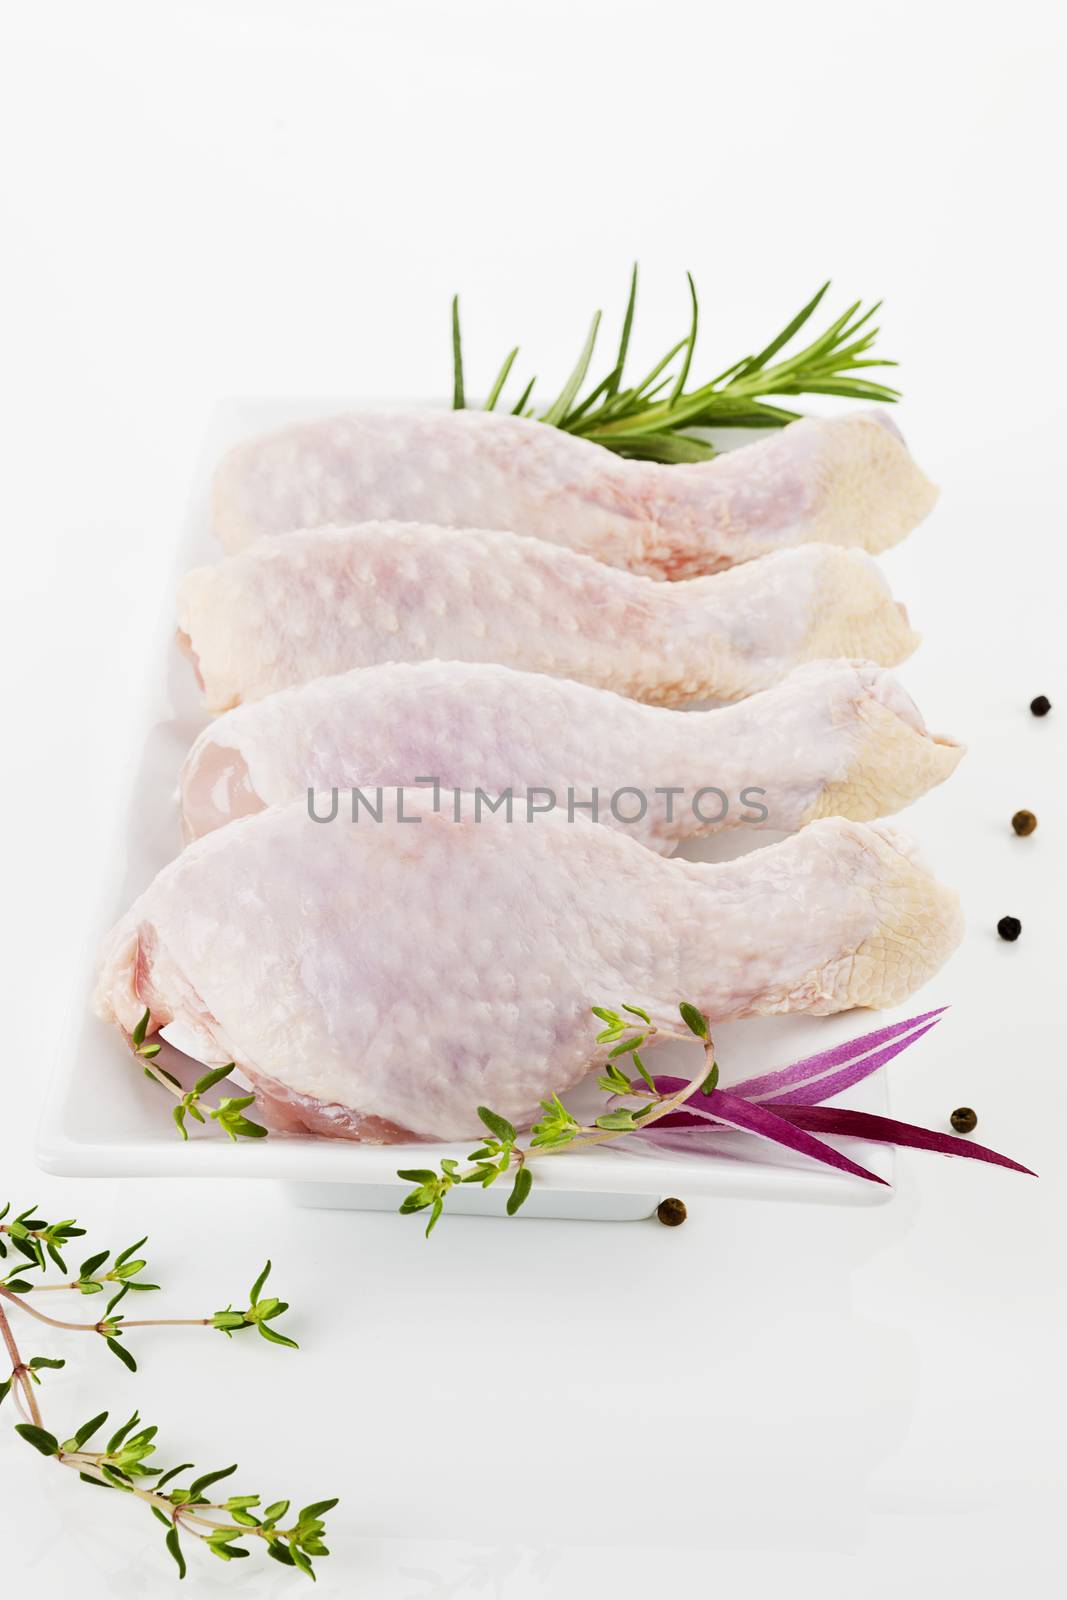 Four uncooked chicken legs on white plate decorated with rosemary and pepper corns.